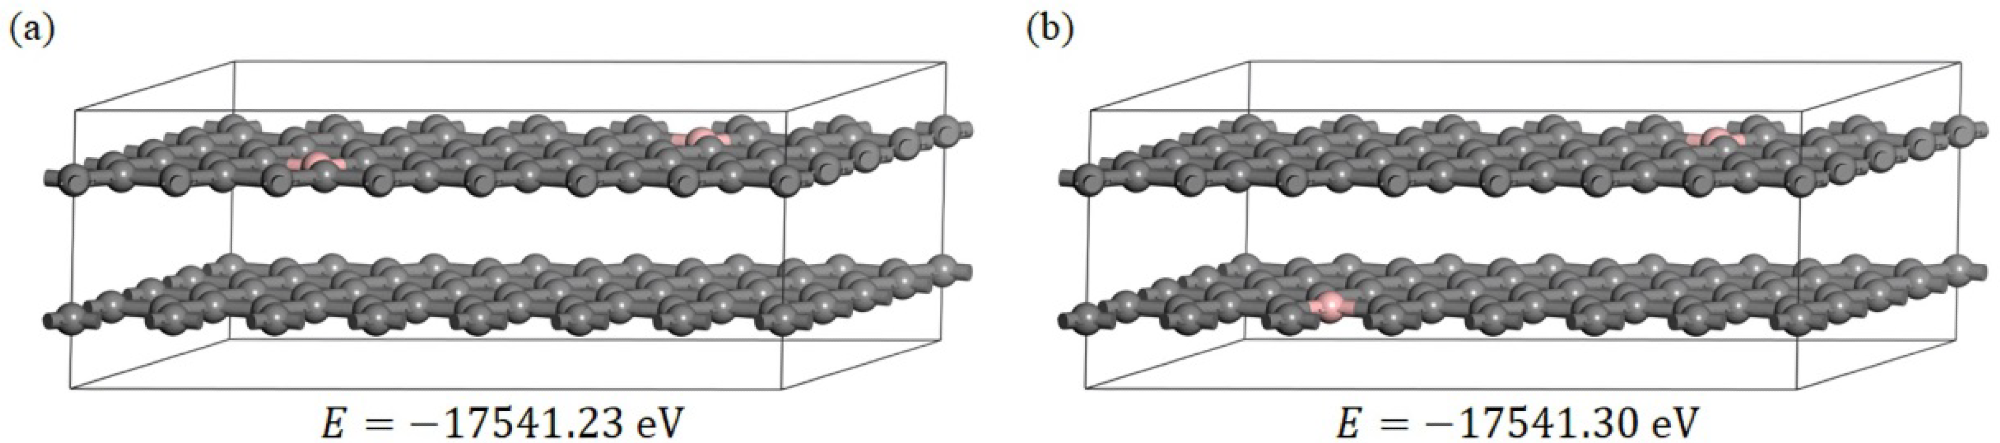 (a,b) two boron-doped graphite models, in which the pink atoms are boron and the grey atoms are carbon; E is the total energy of the models after optimization of the geometry.